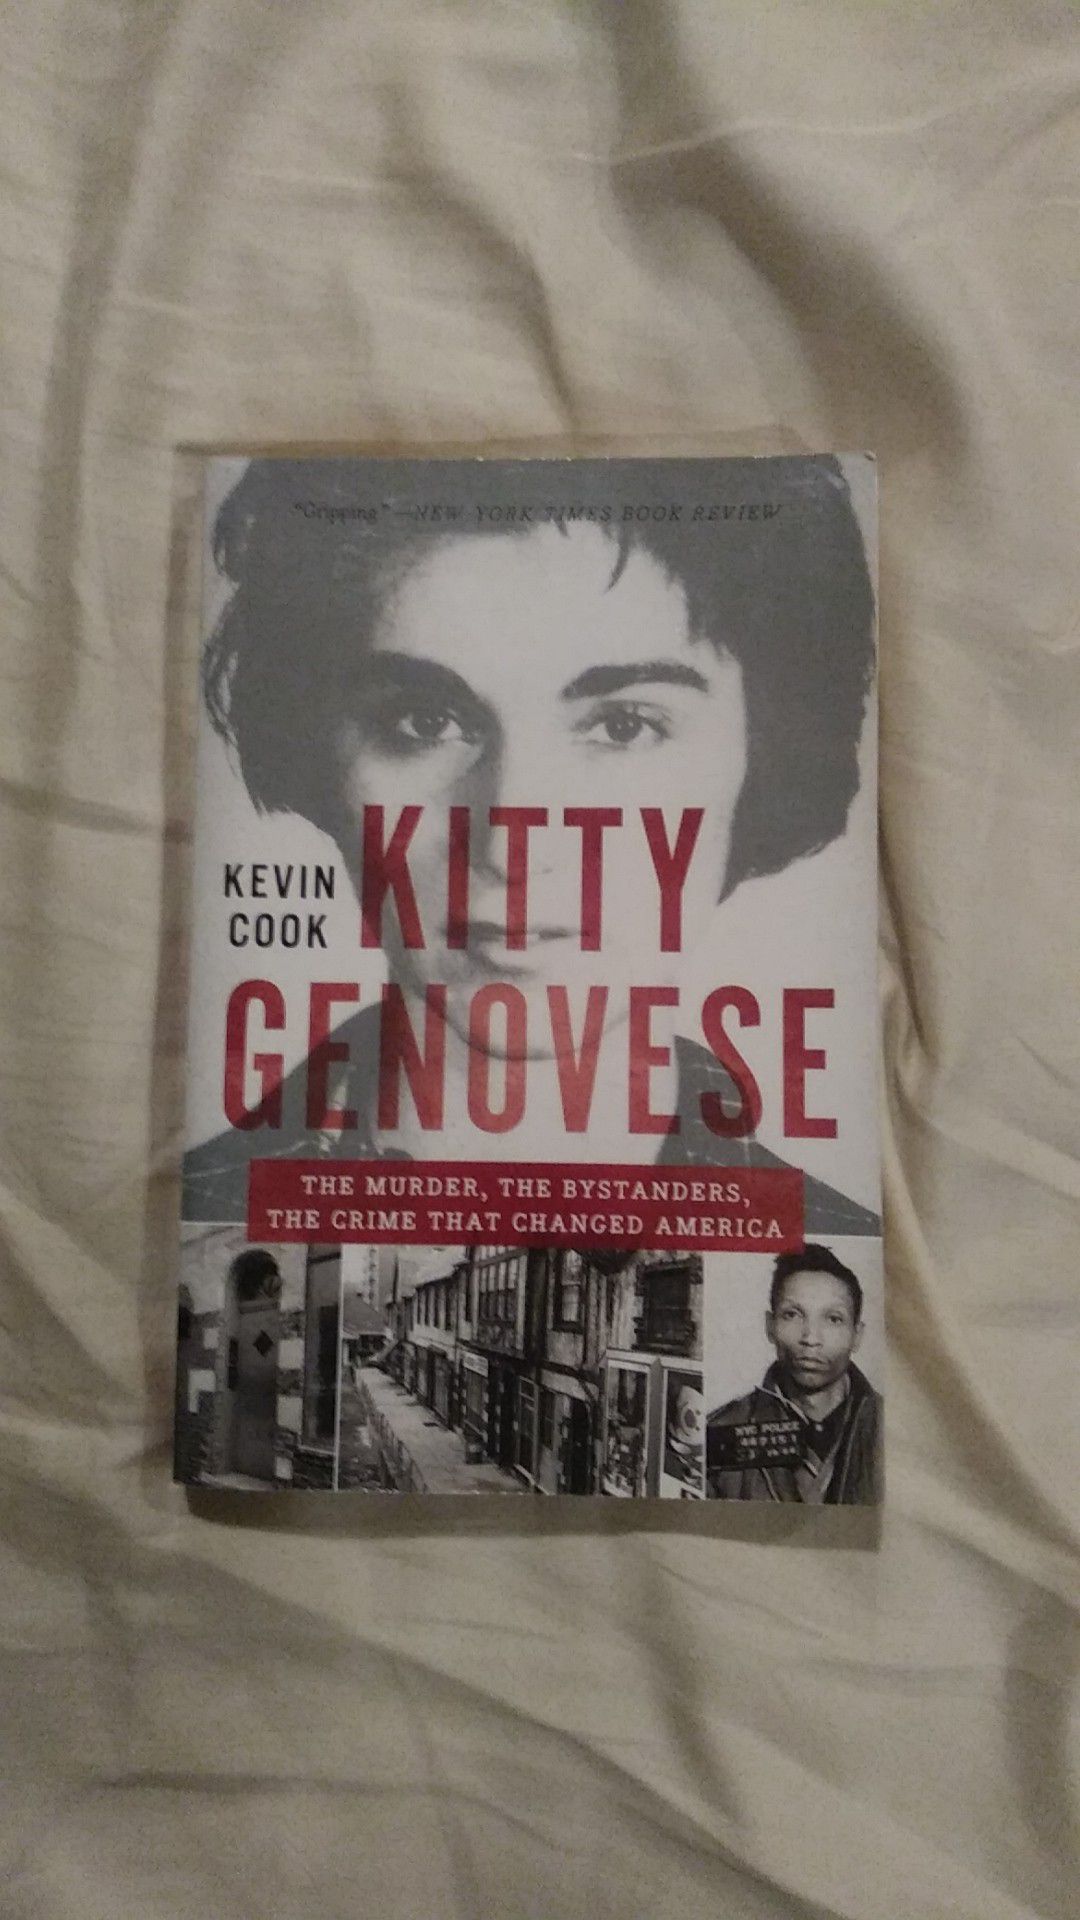 Kitty Genovese the crime that changed America